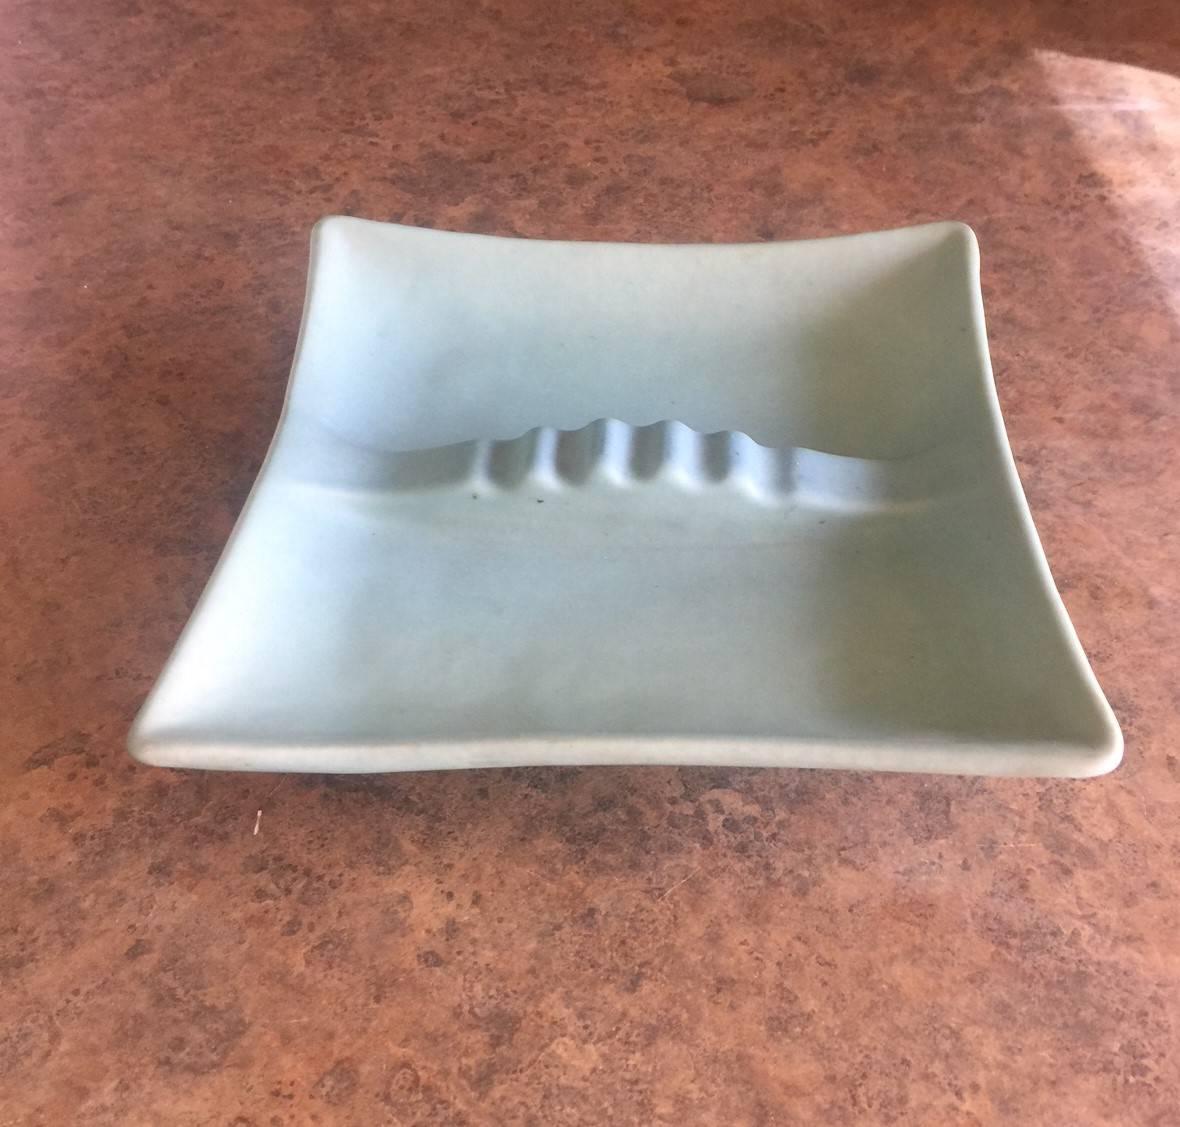 Very nice ming blue art pottery footed ashtray by Van Briggle of Colorado Springs, CO., circa 1930s. The piece is signed on the underside and is in excellent condition with no chips or cracks.